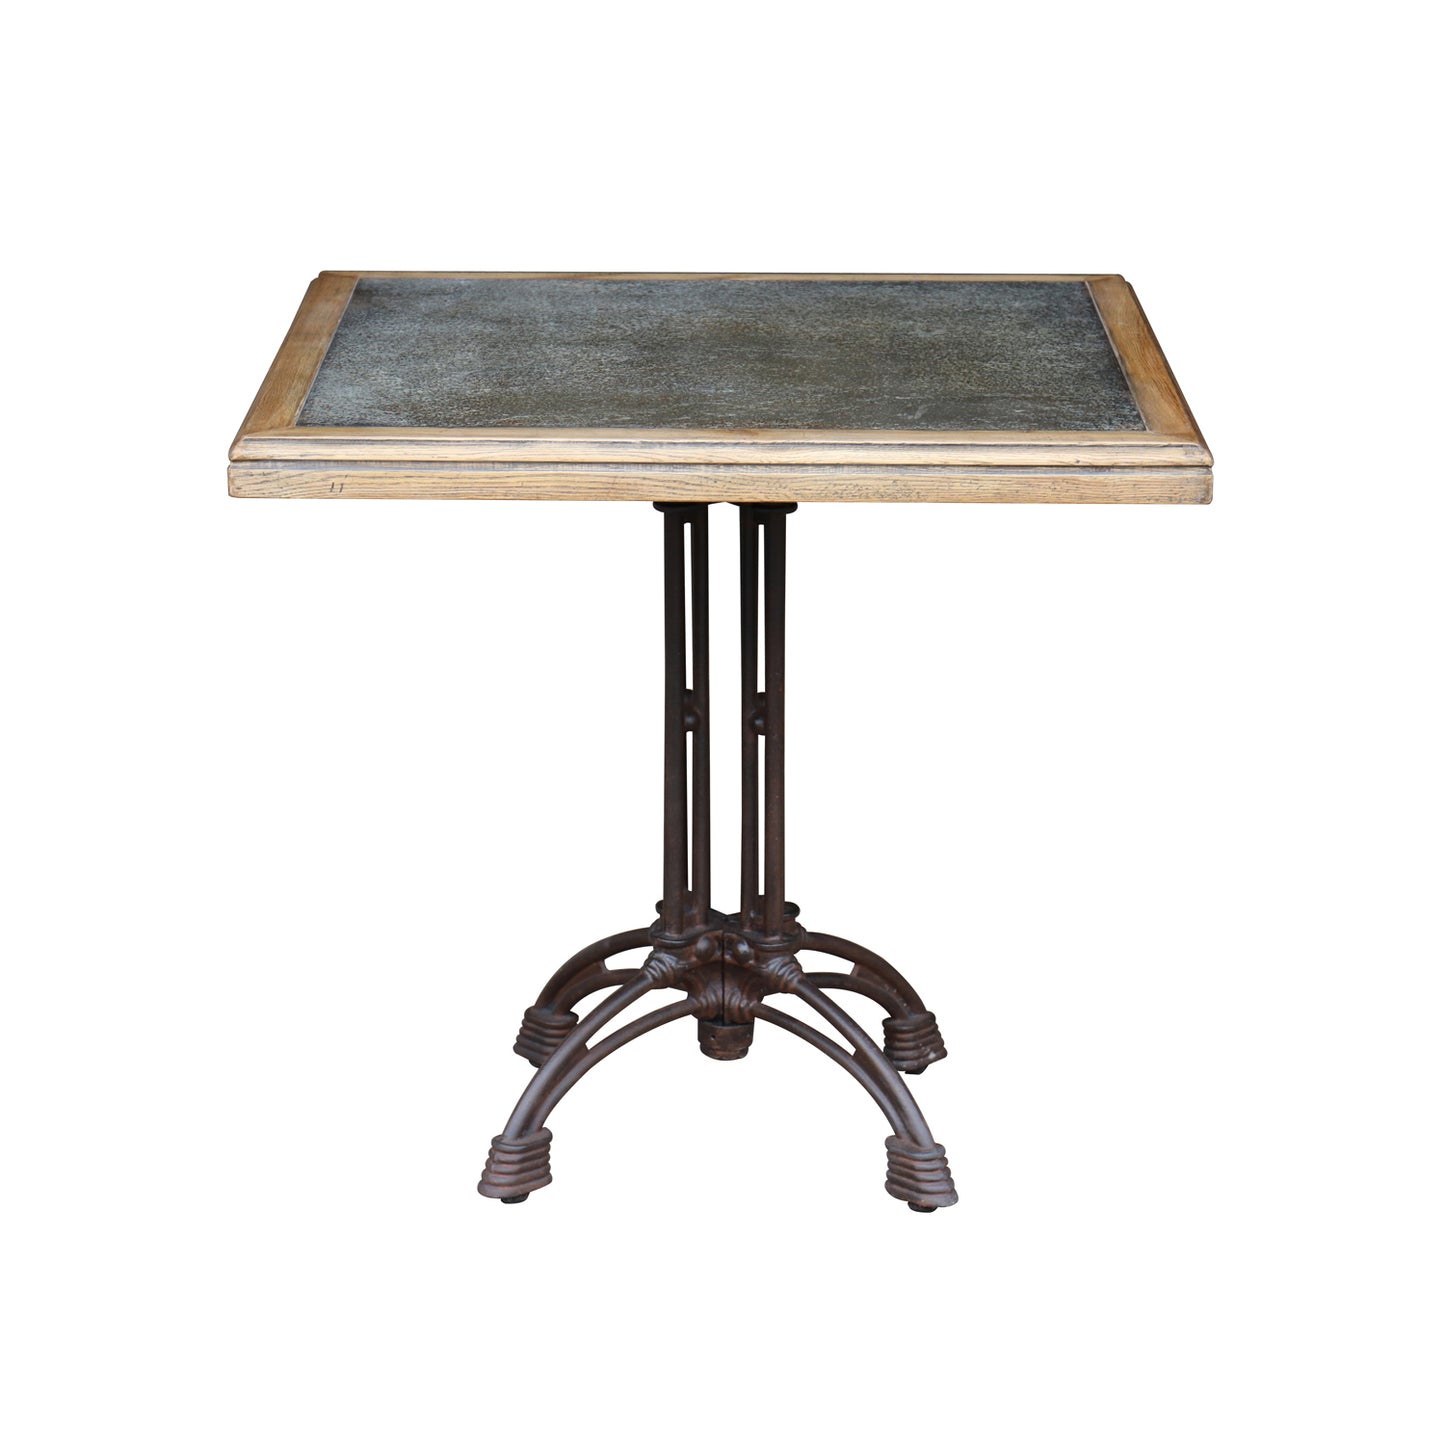 Lambs Green - Zinc Top Square Cafe Table